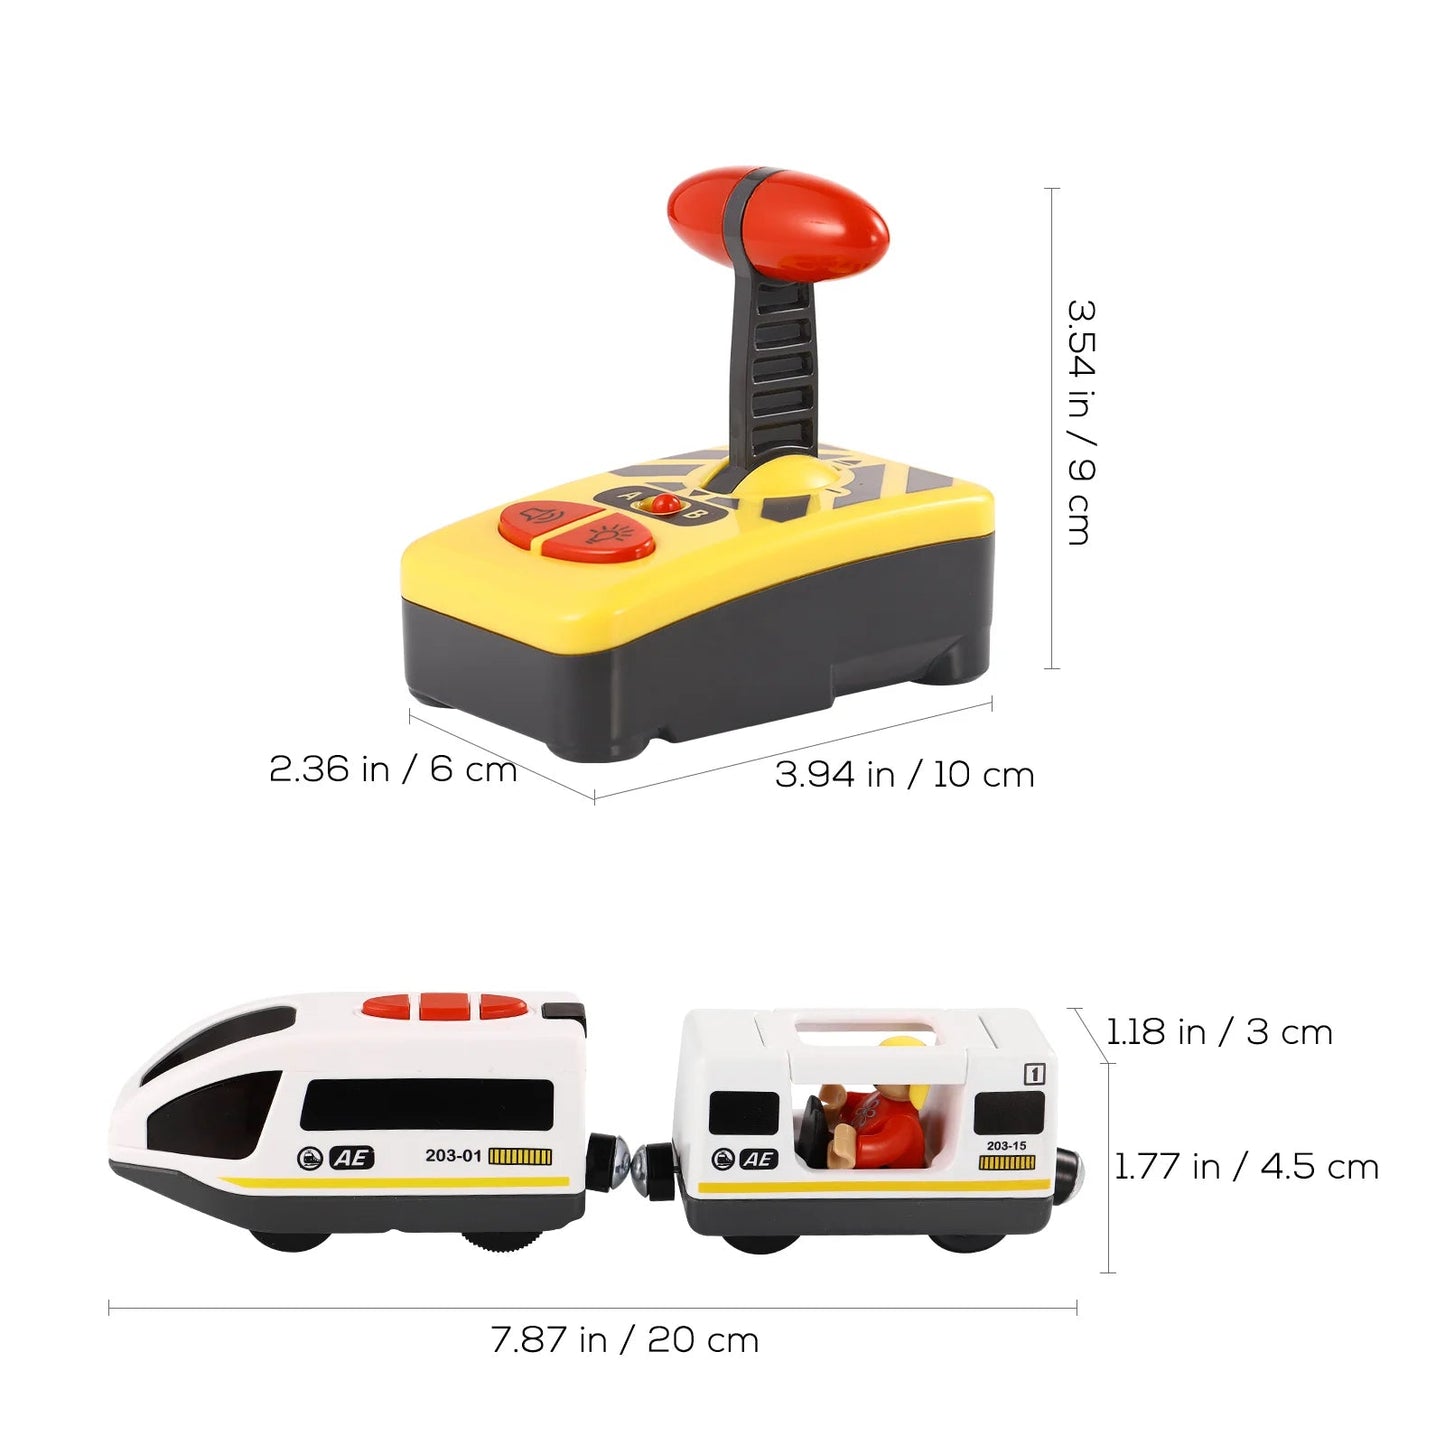 STOBOK Funny RC Electric Train Model Toy for Children